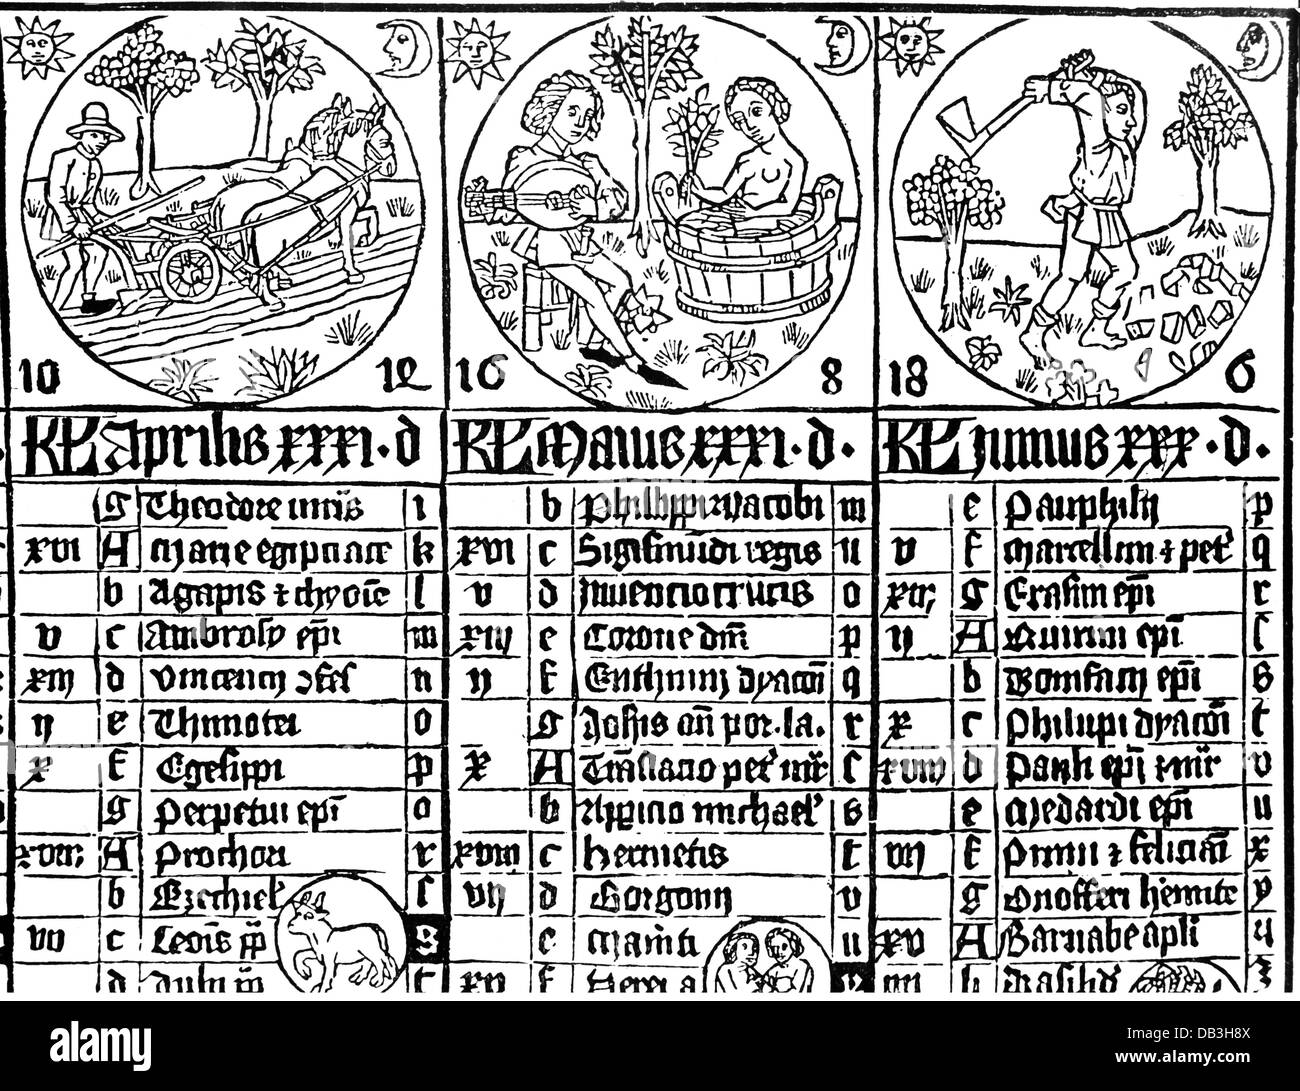 calendar, month April, May and June, calendar of Johannes von Gmunden, detail, woodcut, circa 1470, Additional-Rights-Clearences-Not Available Stock Photo